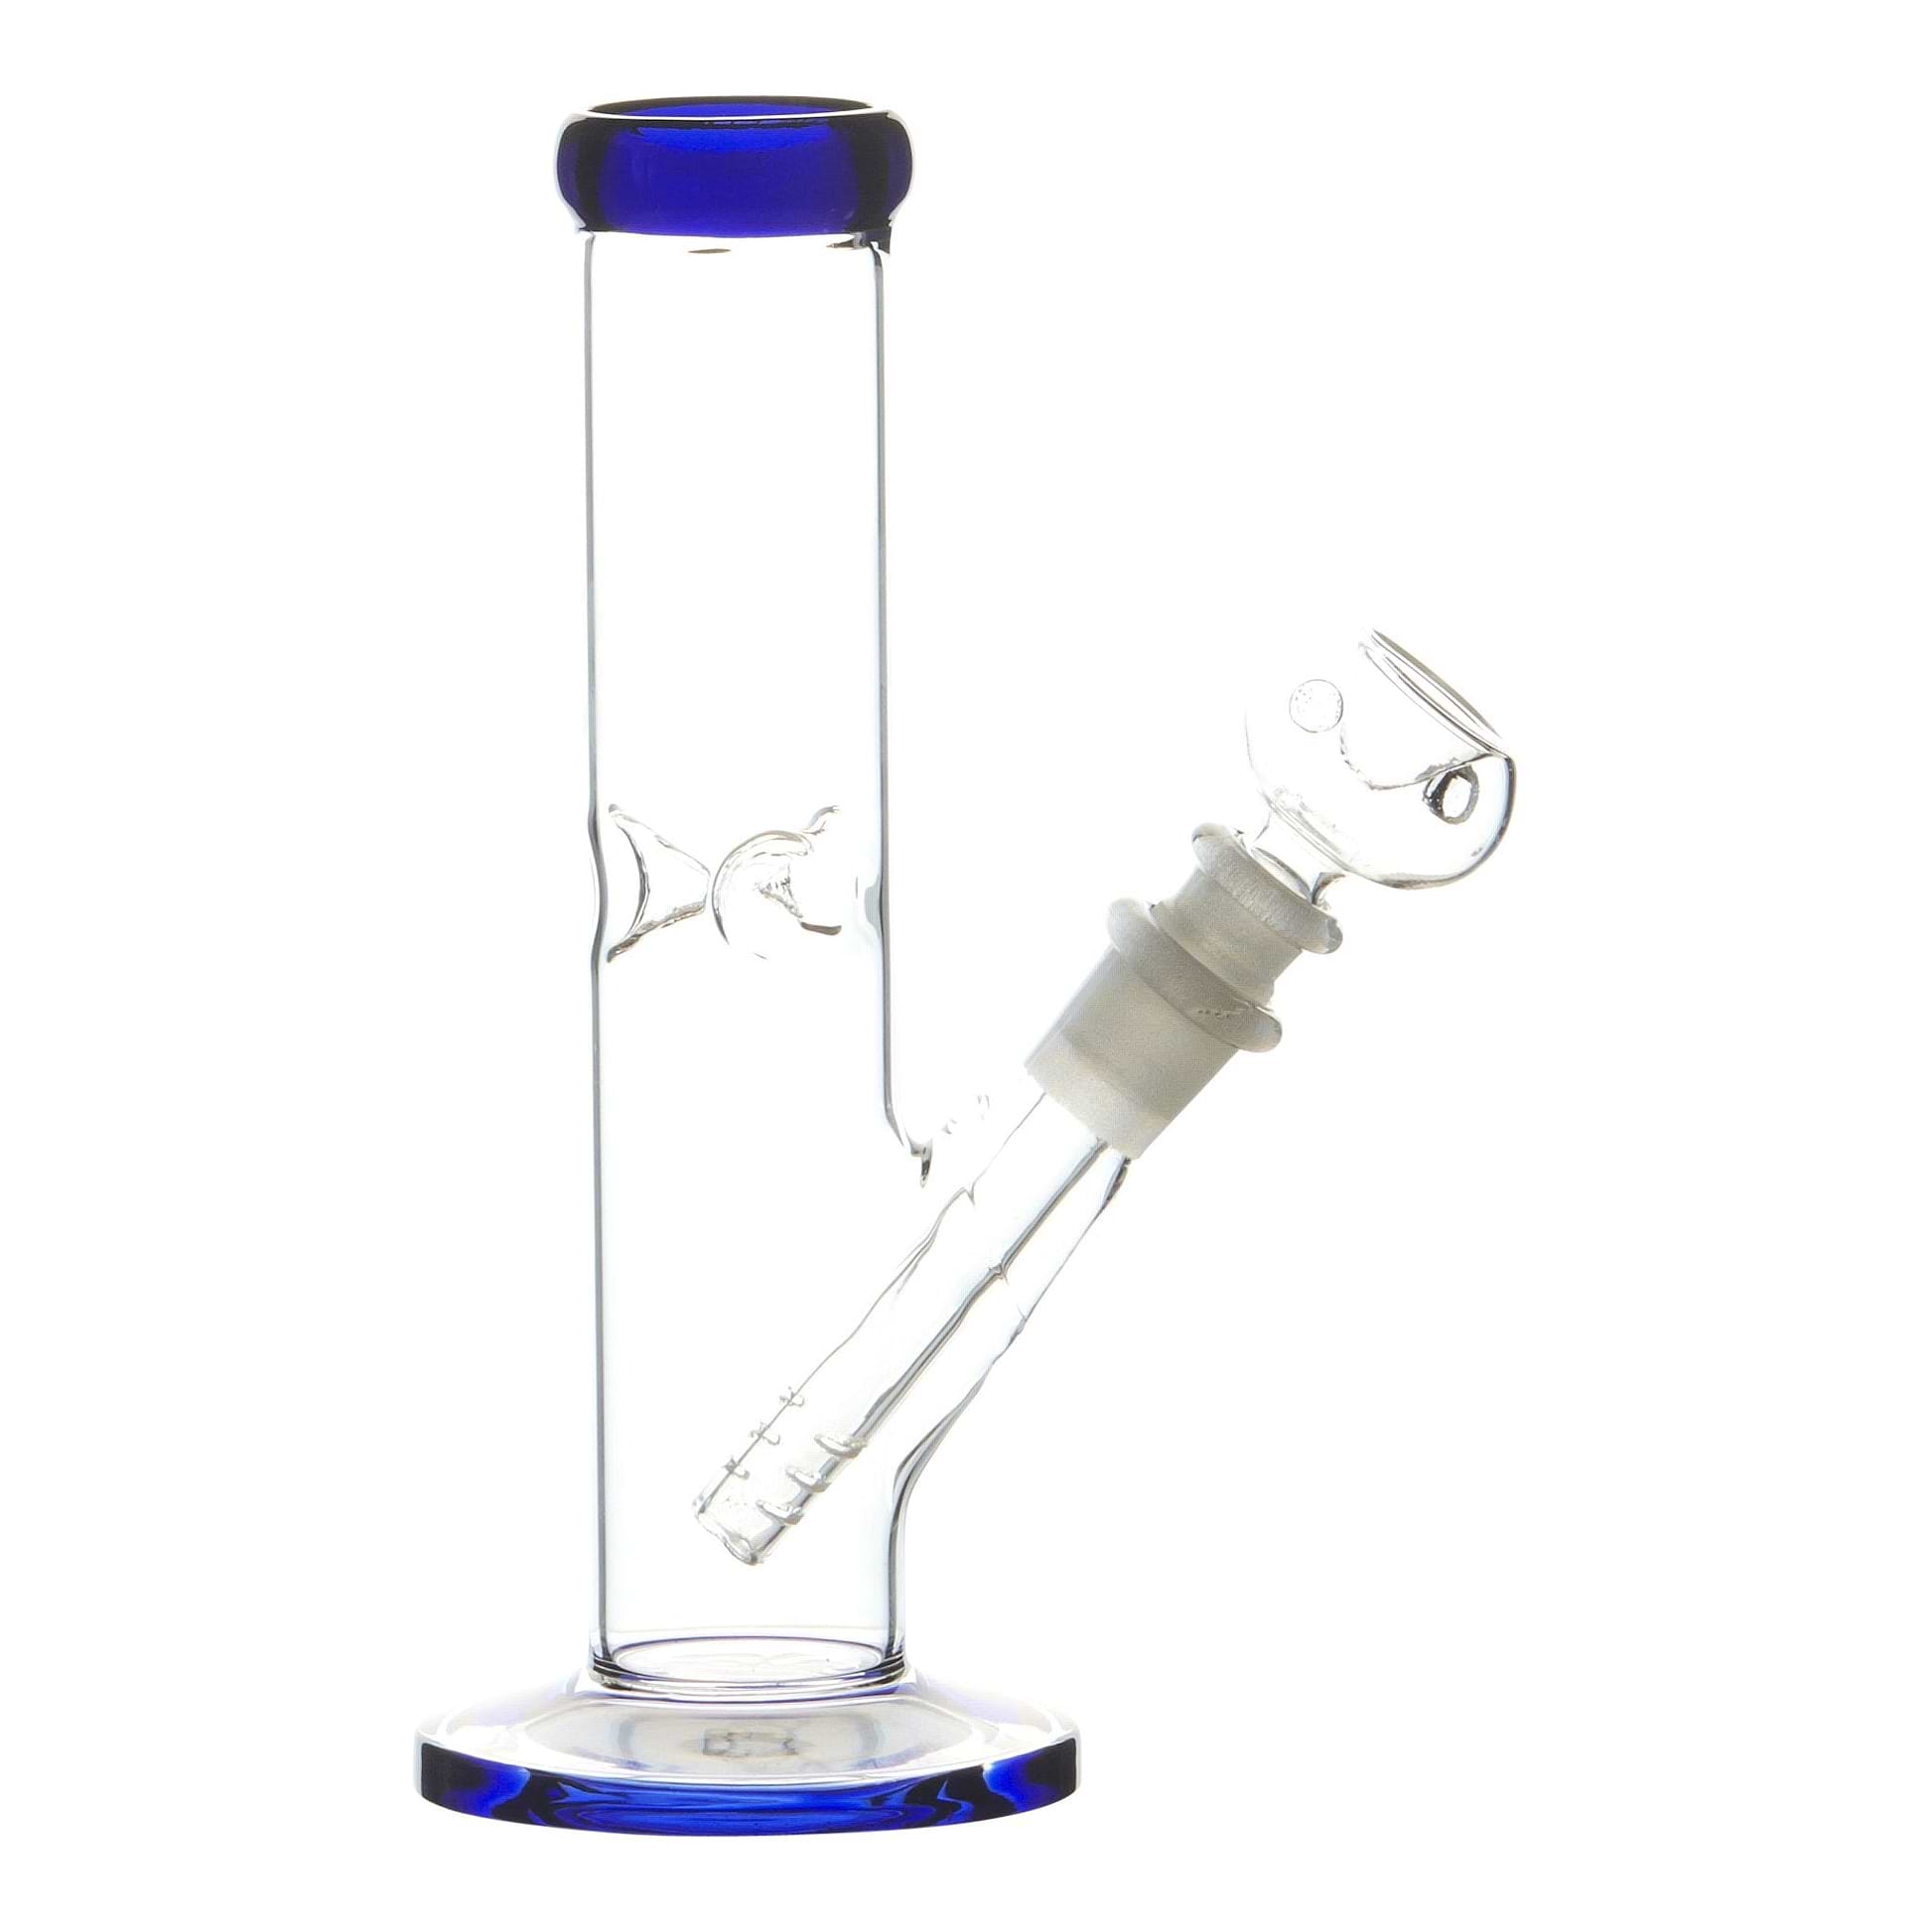 Blue 8-inch straight up glass bong smoking device with ice catcher splashguard easy-to-use design sleek straight classic look